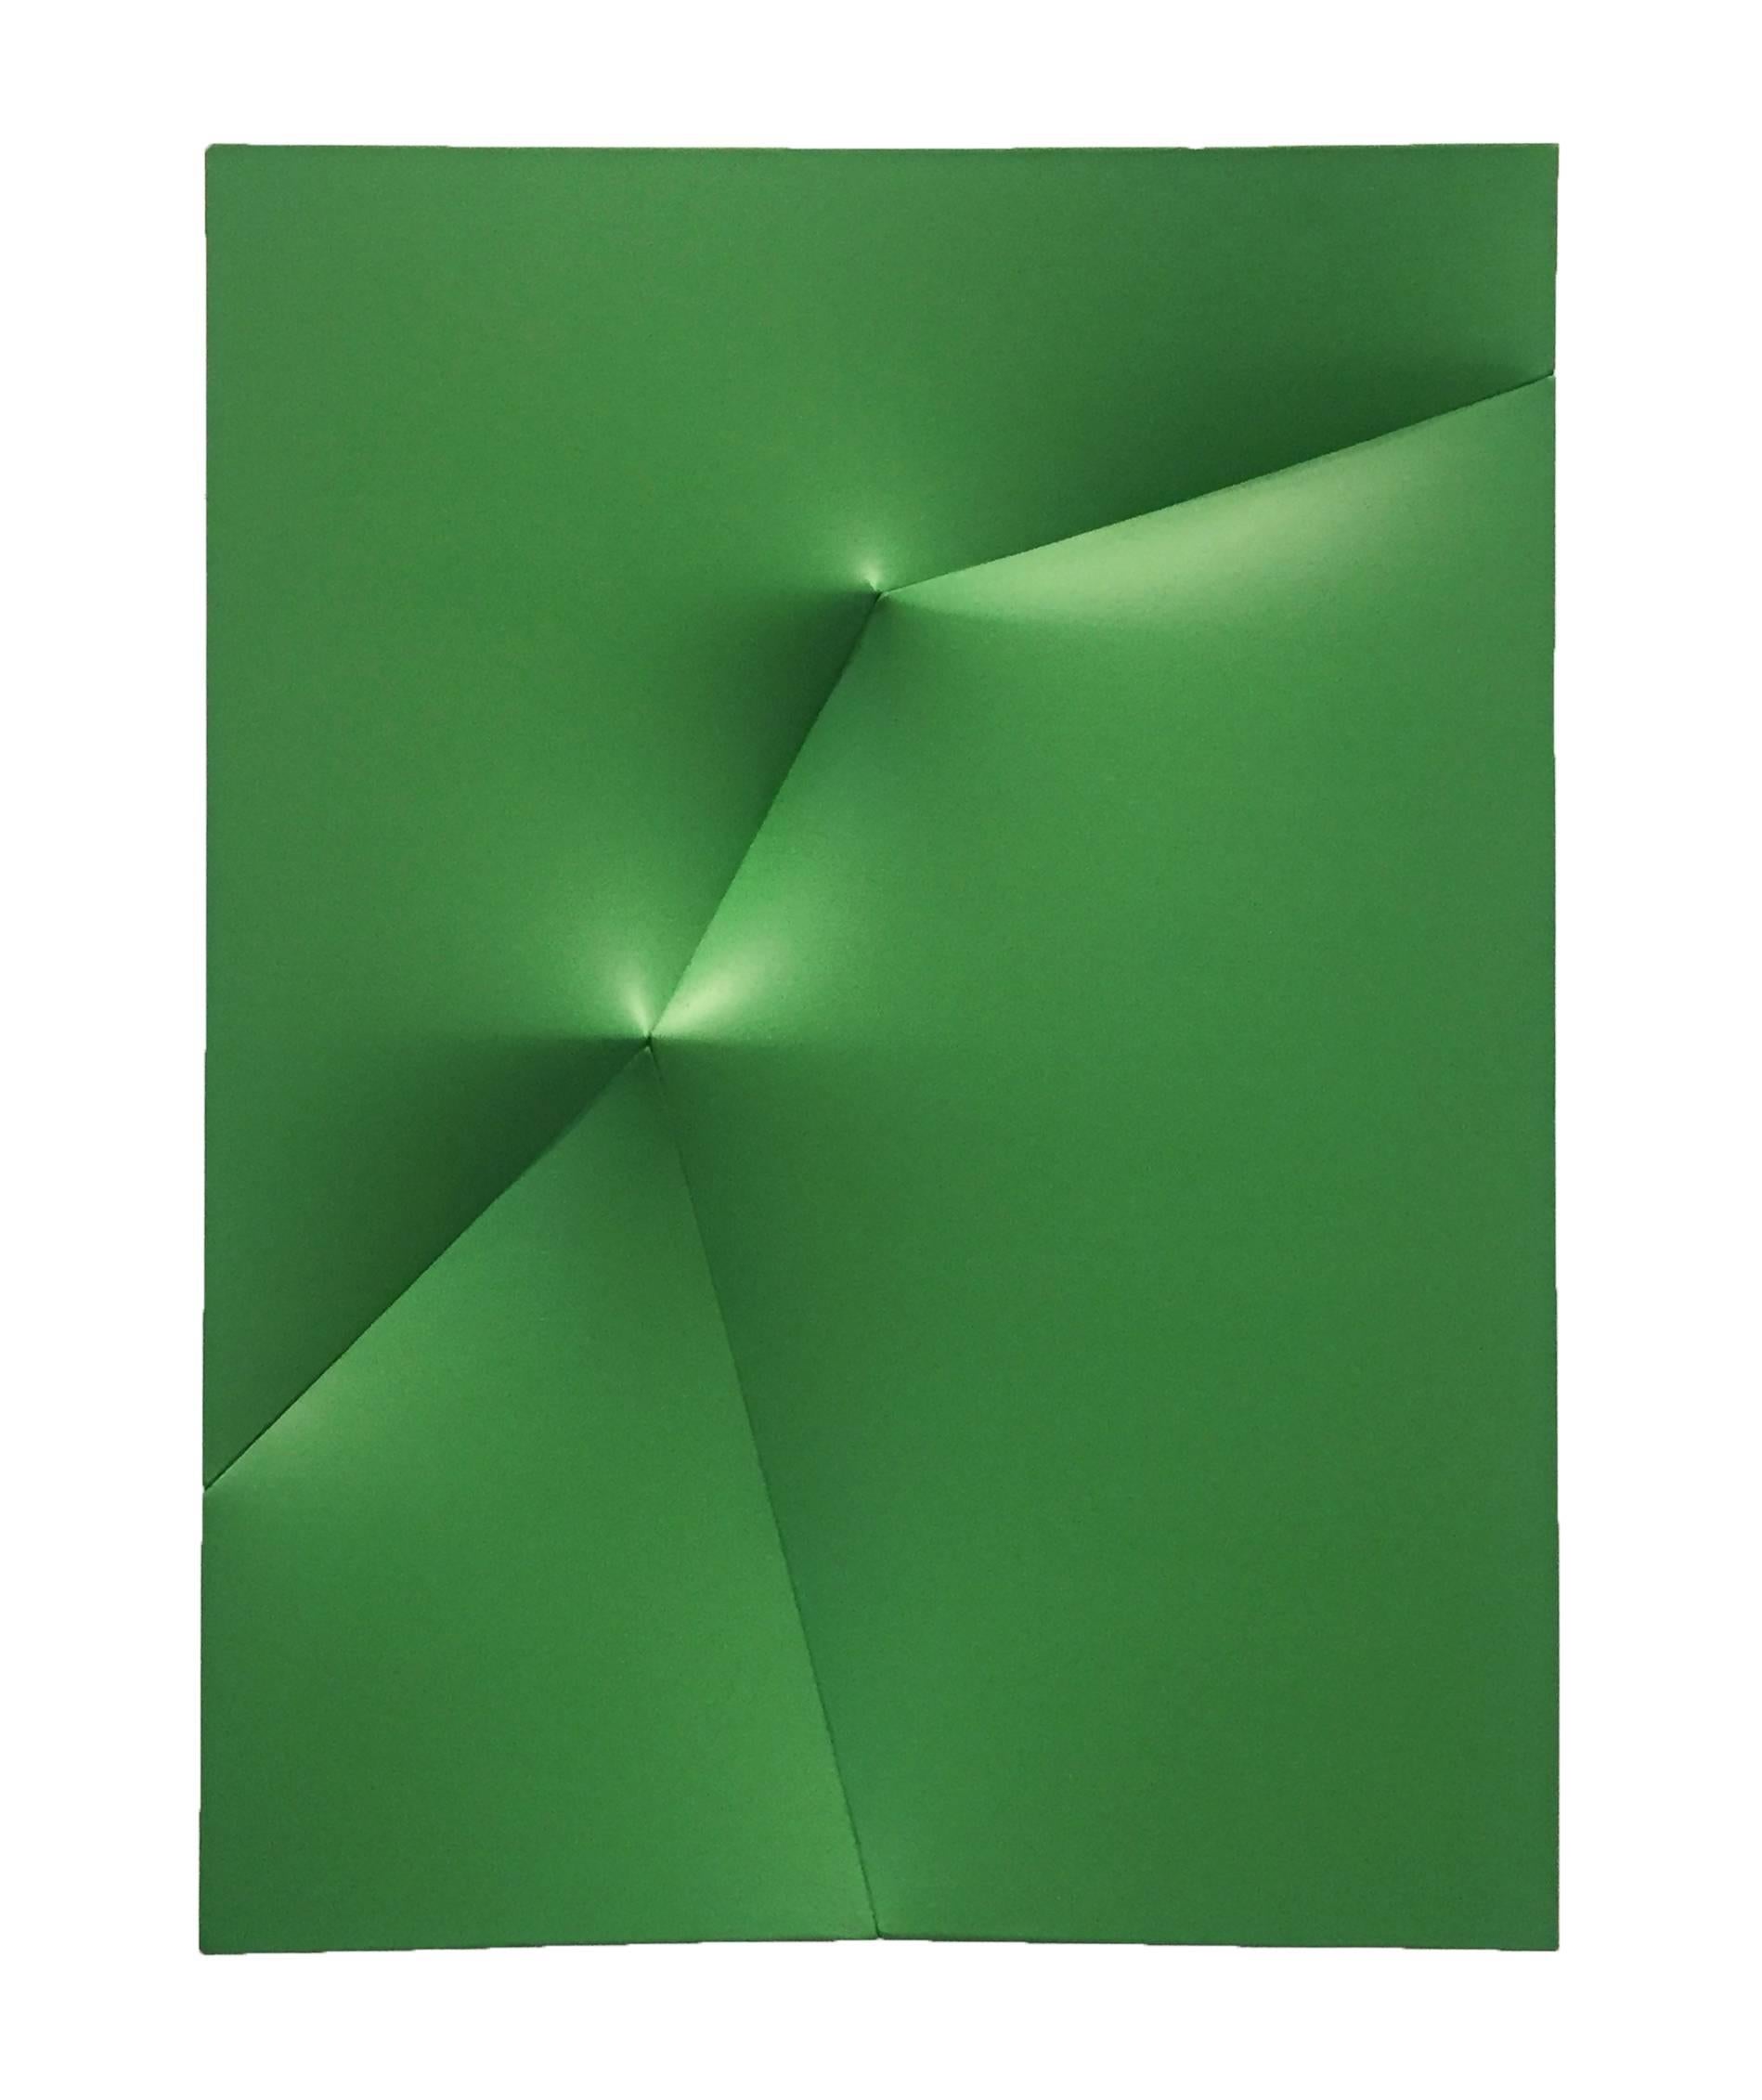 Pointing Out Broken Green - Painting by Jan Maarten Voskuil